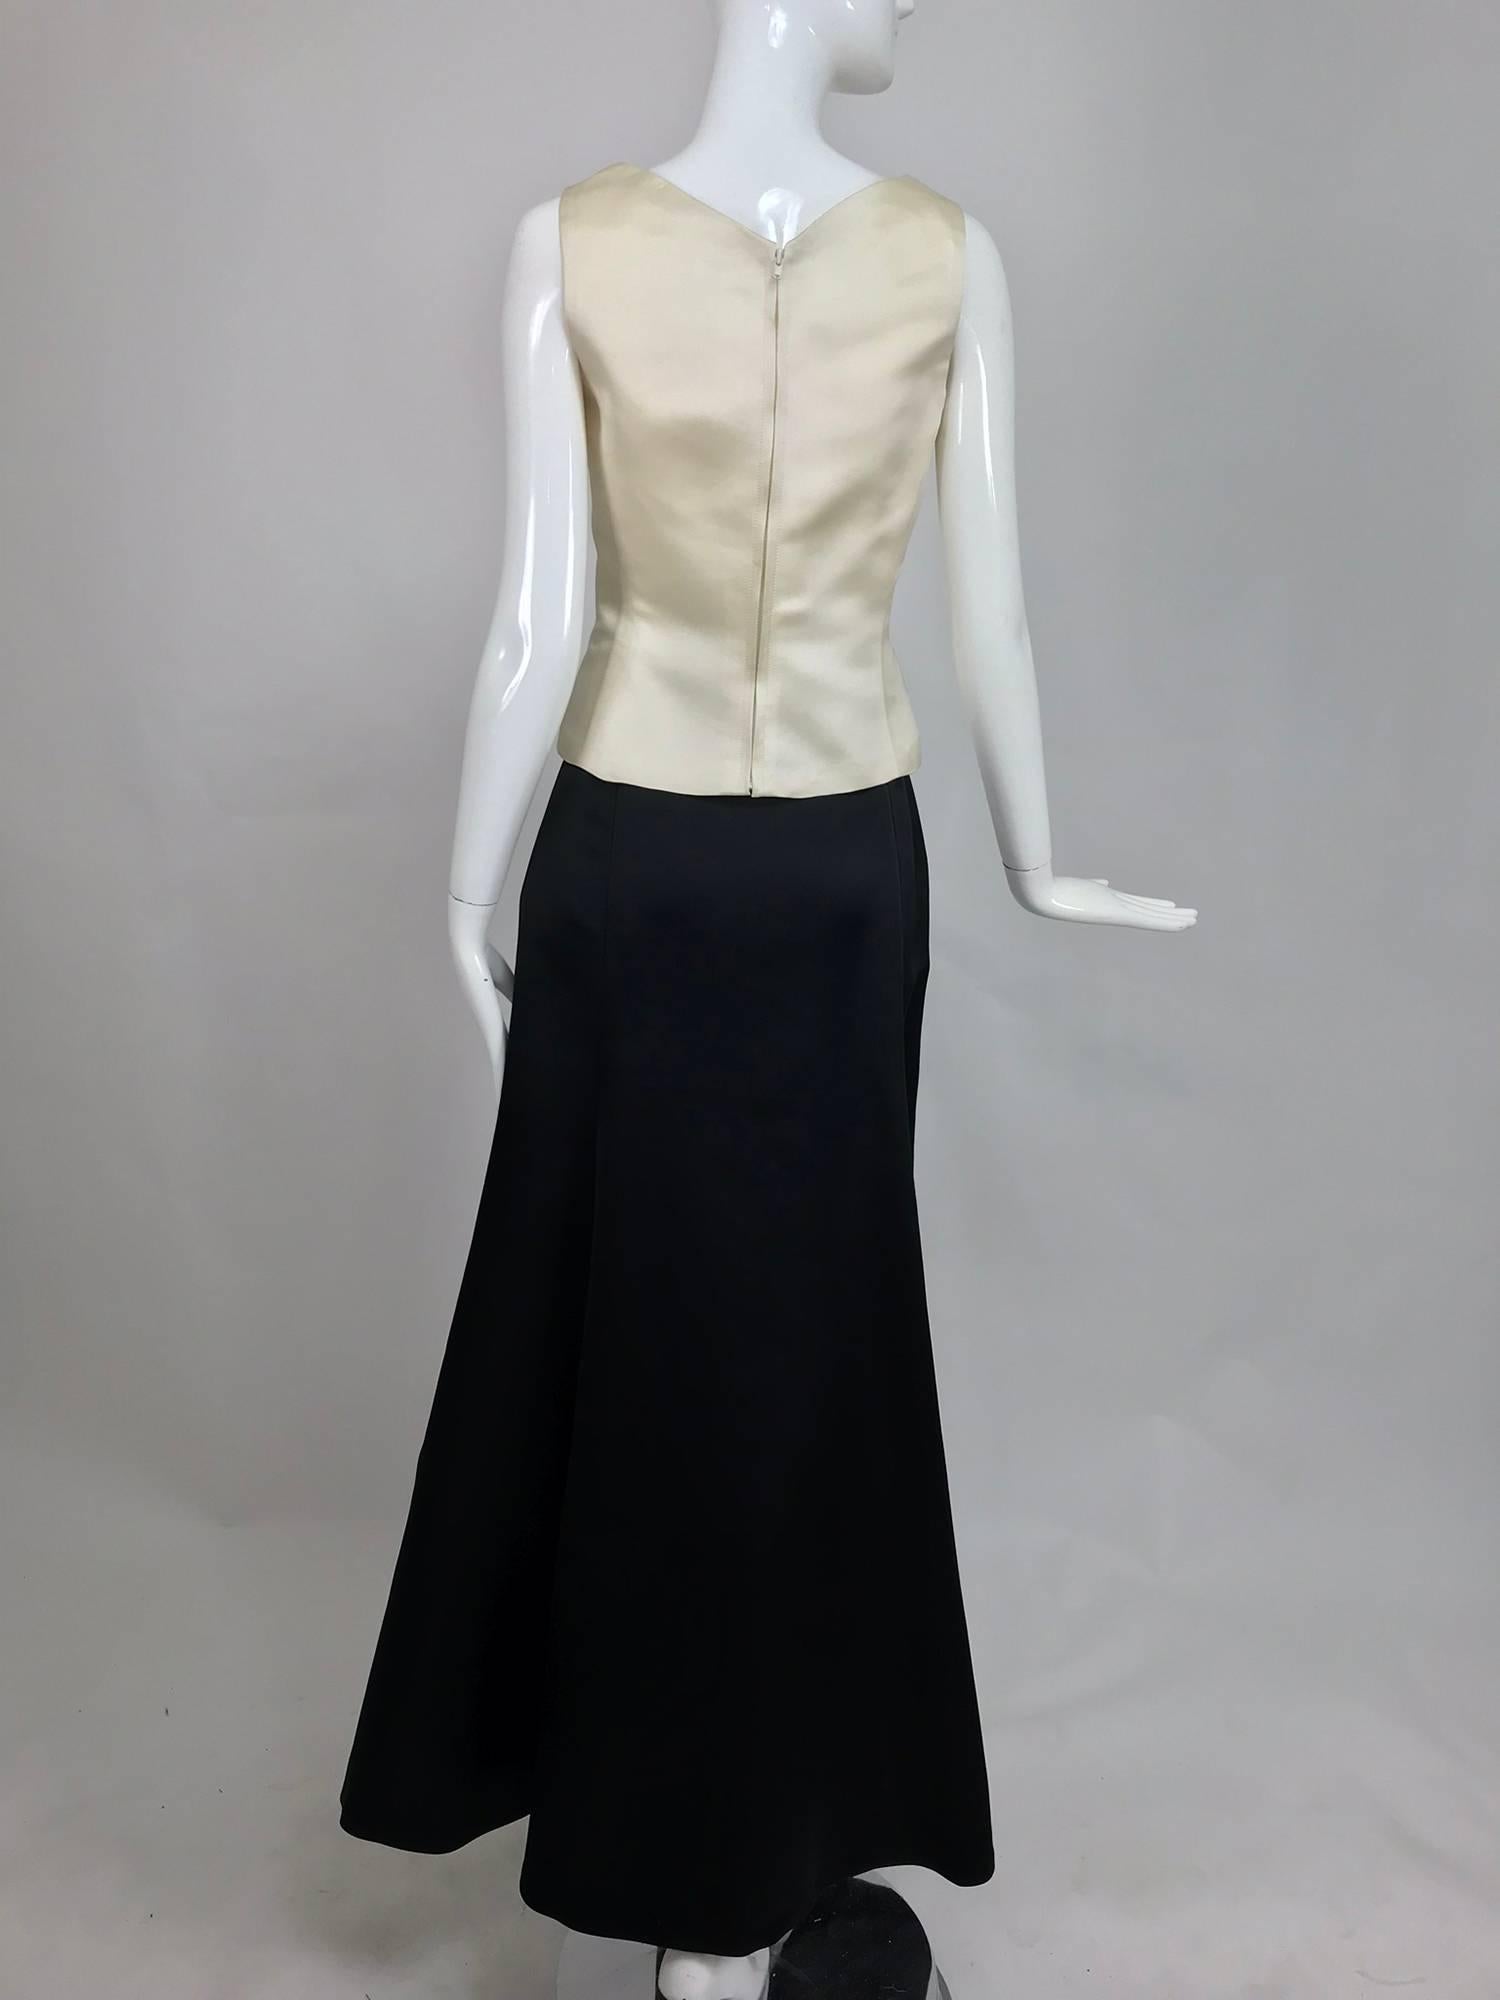 Vintage Bill Blass evening top and skirt set in cream and black silk satin 1980s In Excellent Condition For Sale In West Palm Beach, FL